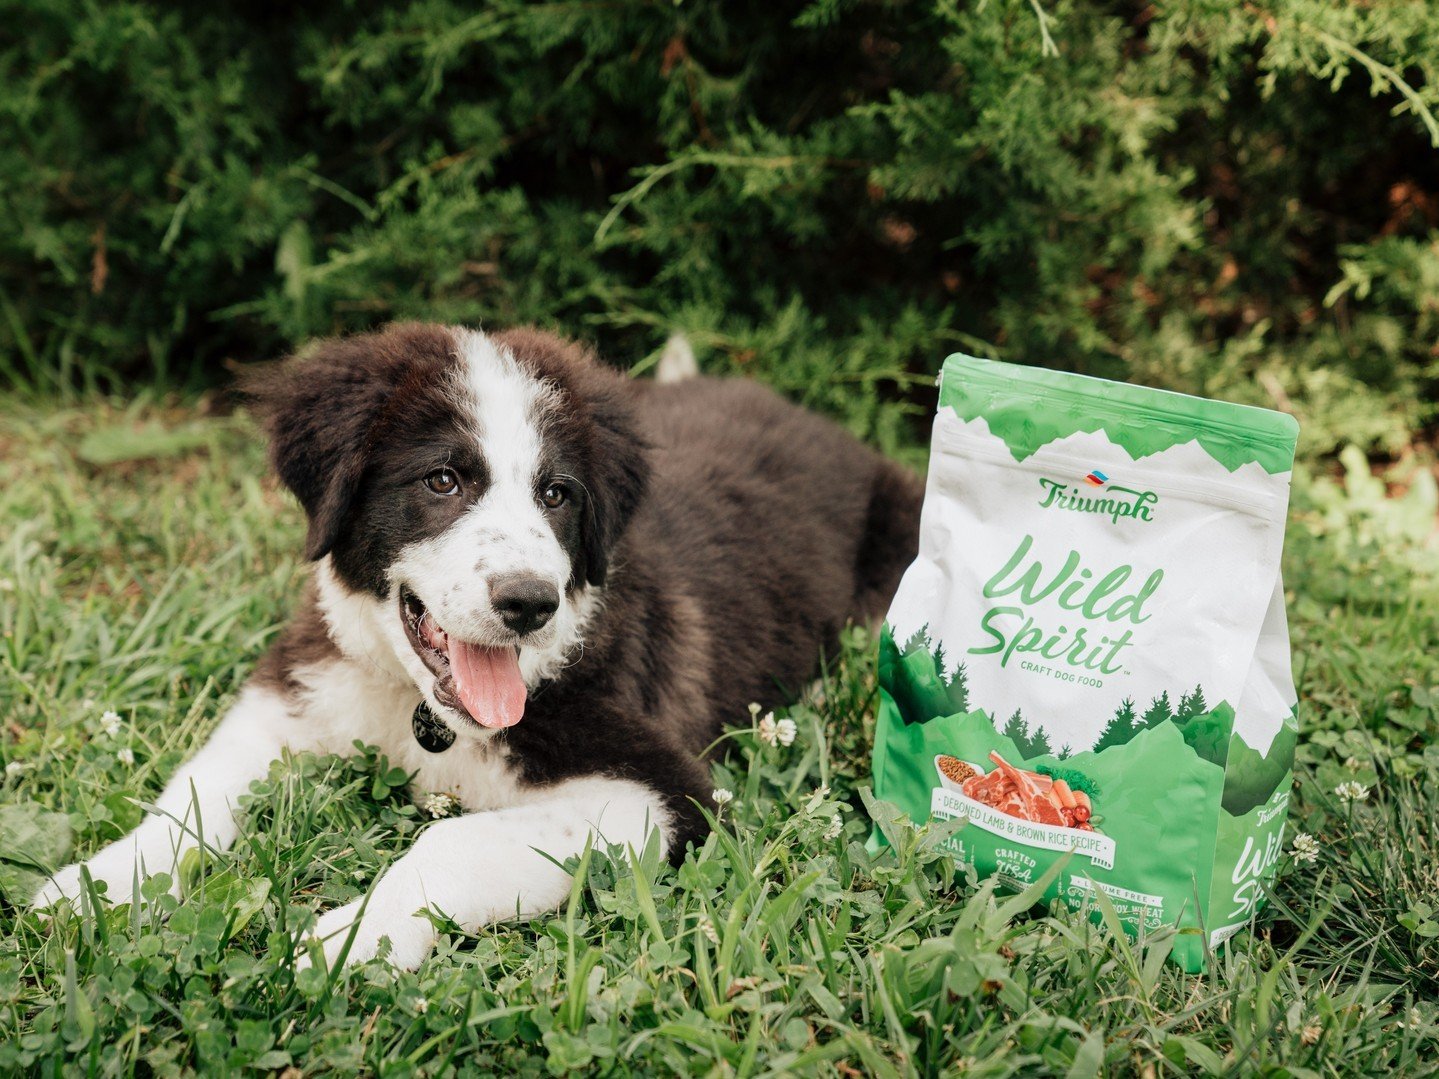 Fuel your pal's Wild Spirit with our Lamb &amp; Brown Rice Recipe Natural Dog Food 🐕 

Specially crafted with some of the best ingredients nature has to offer 🌱 You won't find any artificial colors, flavors, or preservatives here! 

Get your bag at